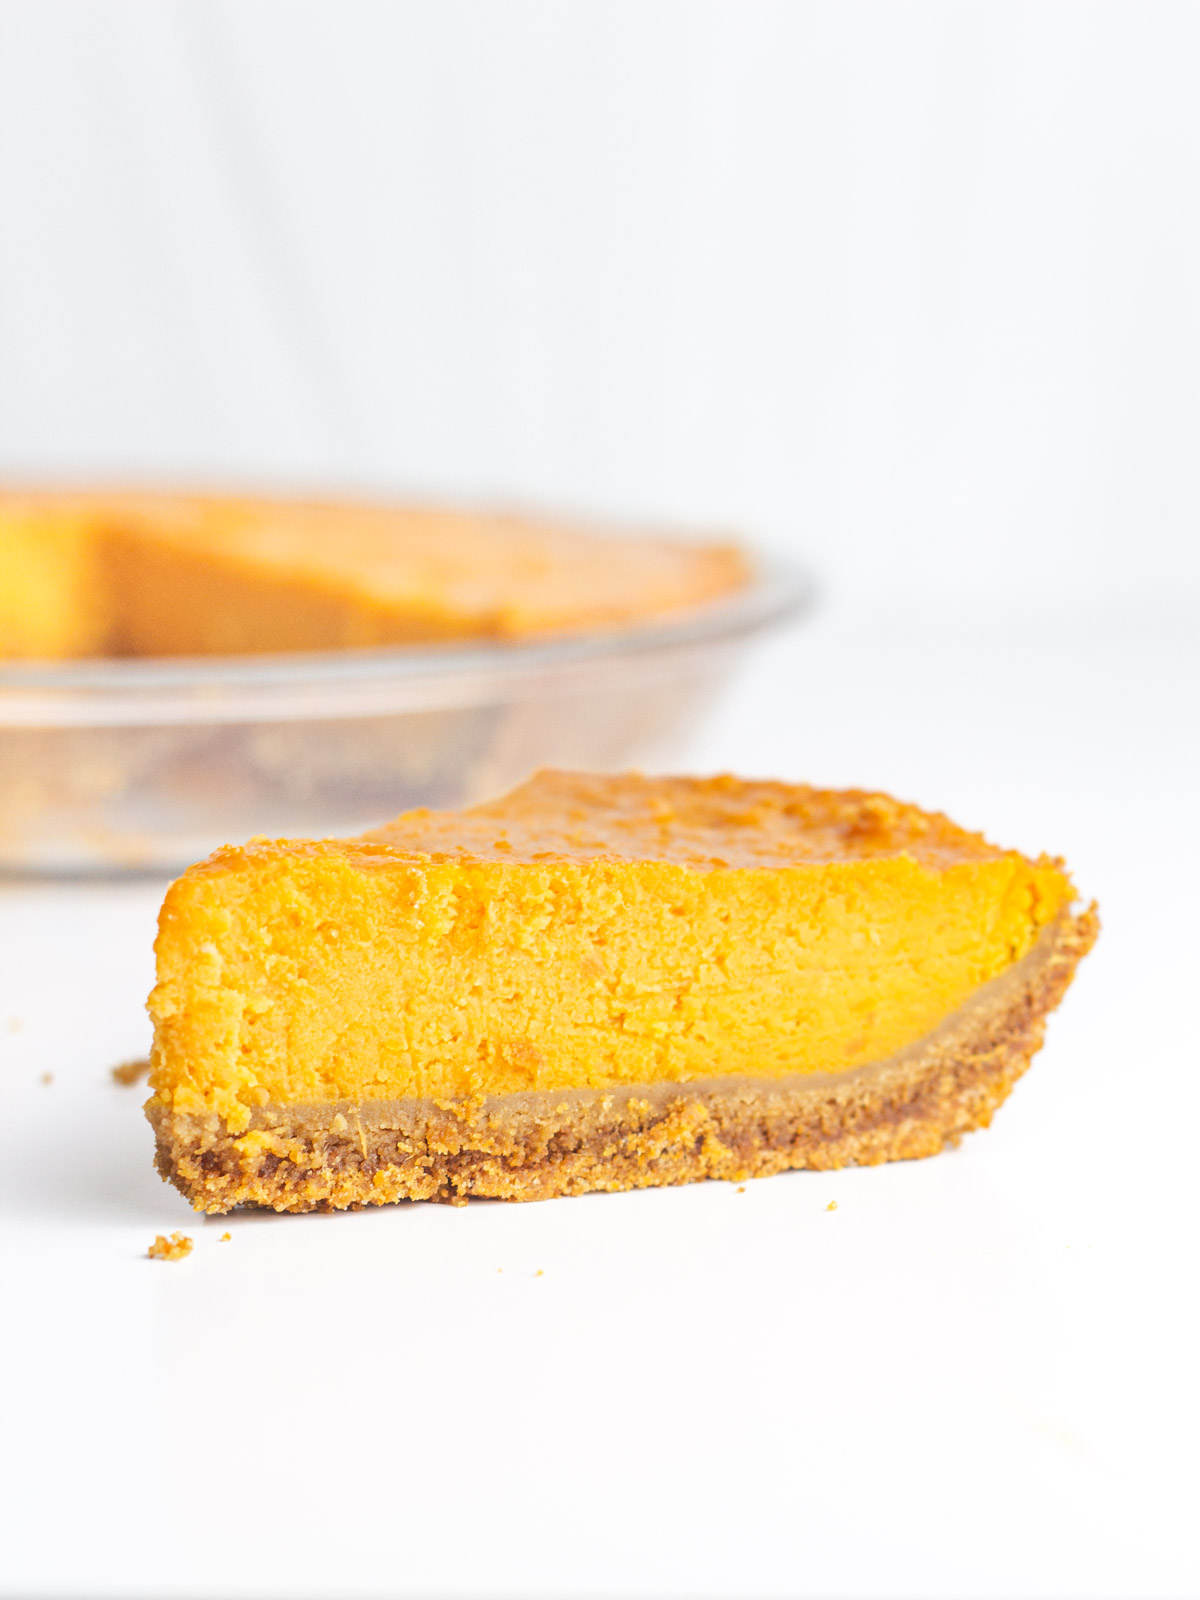 A slice of sweet potato pie on a white surface in front of the rest of the pie in the background.